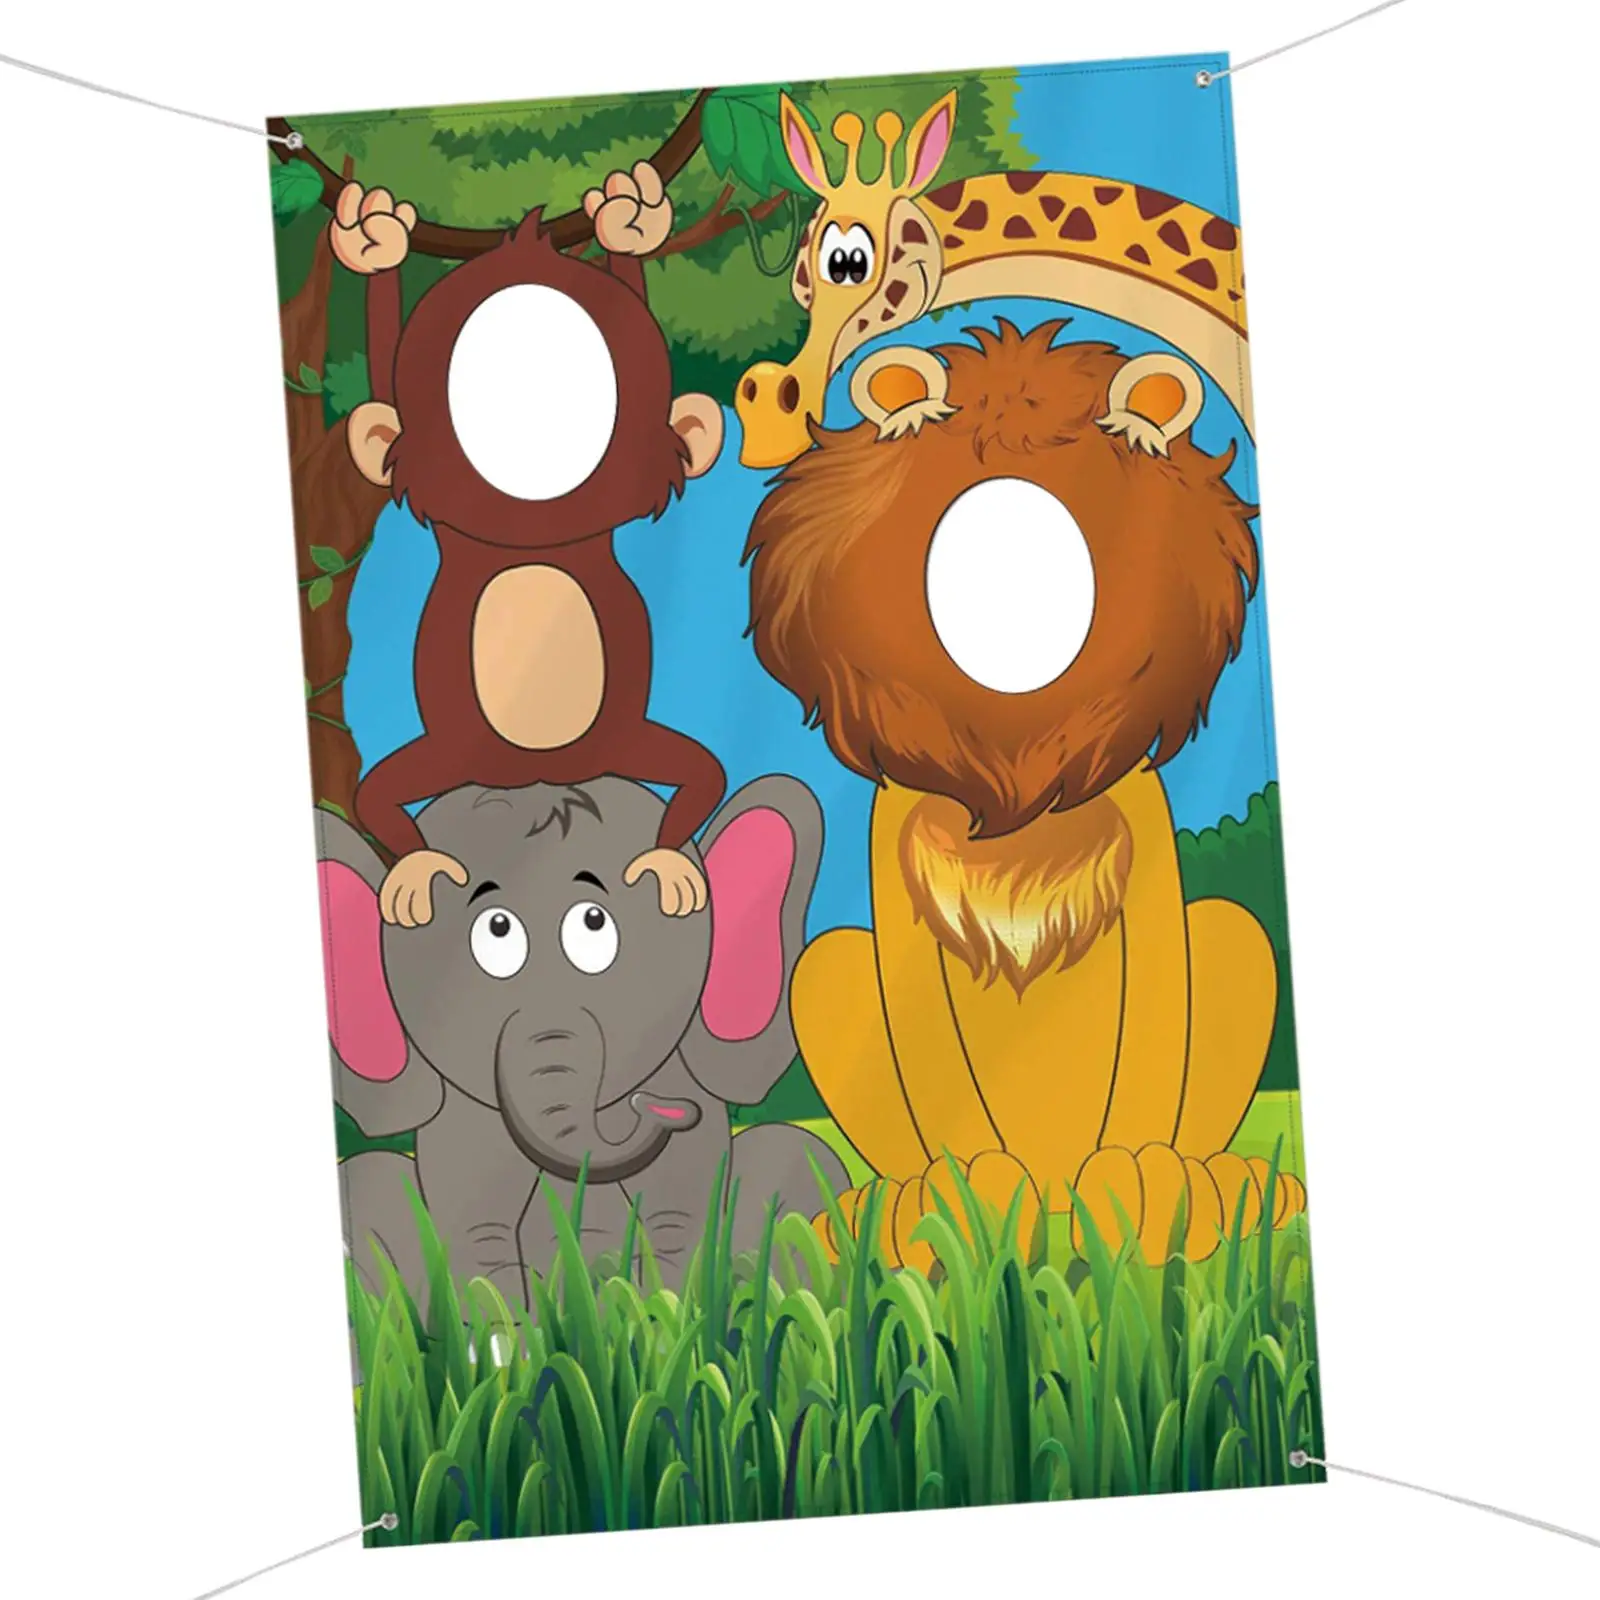 Wild Animals Face in Hole Game Backdrop Door Banner with Zoo Animals Elements Jungle Atmosphere Durable Family Playtime Birthday